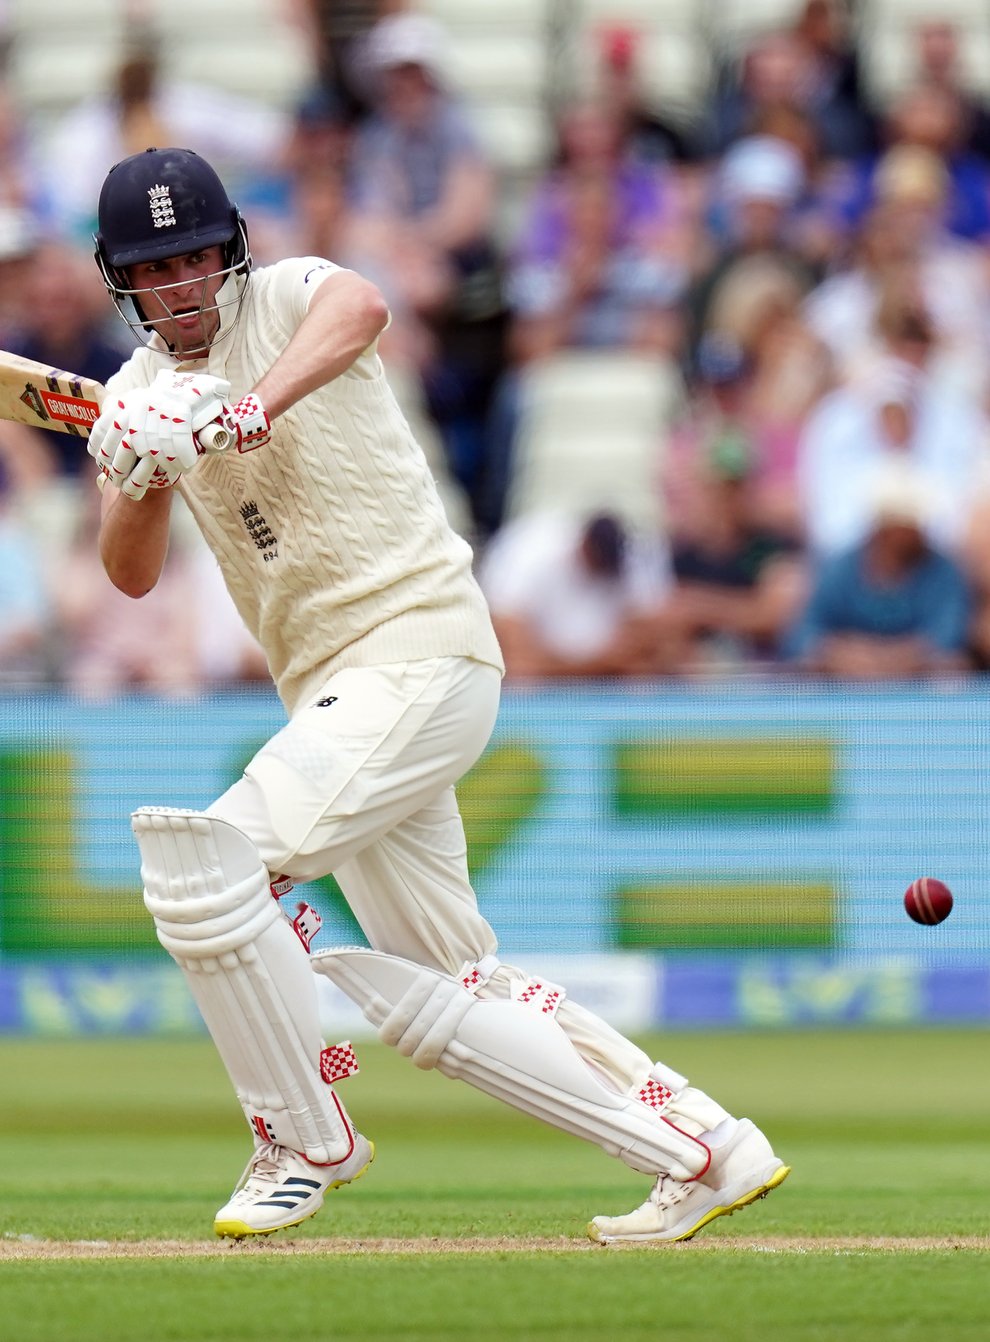 Dom Sibley dug in to make a half-century and help Warwickshire bat out a draw (Mike Egerton/PA)